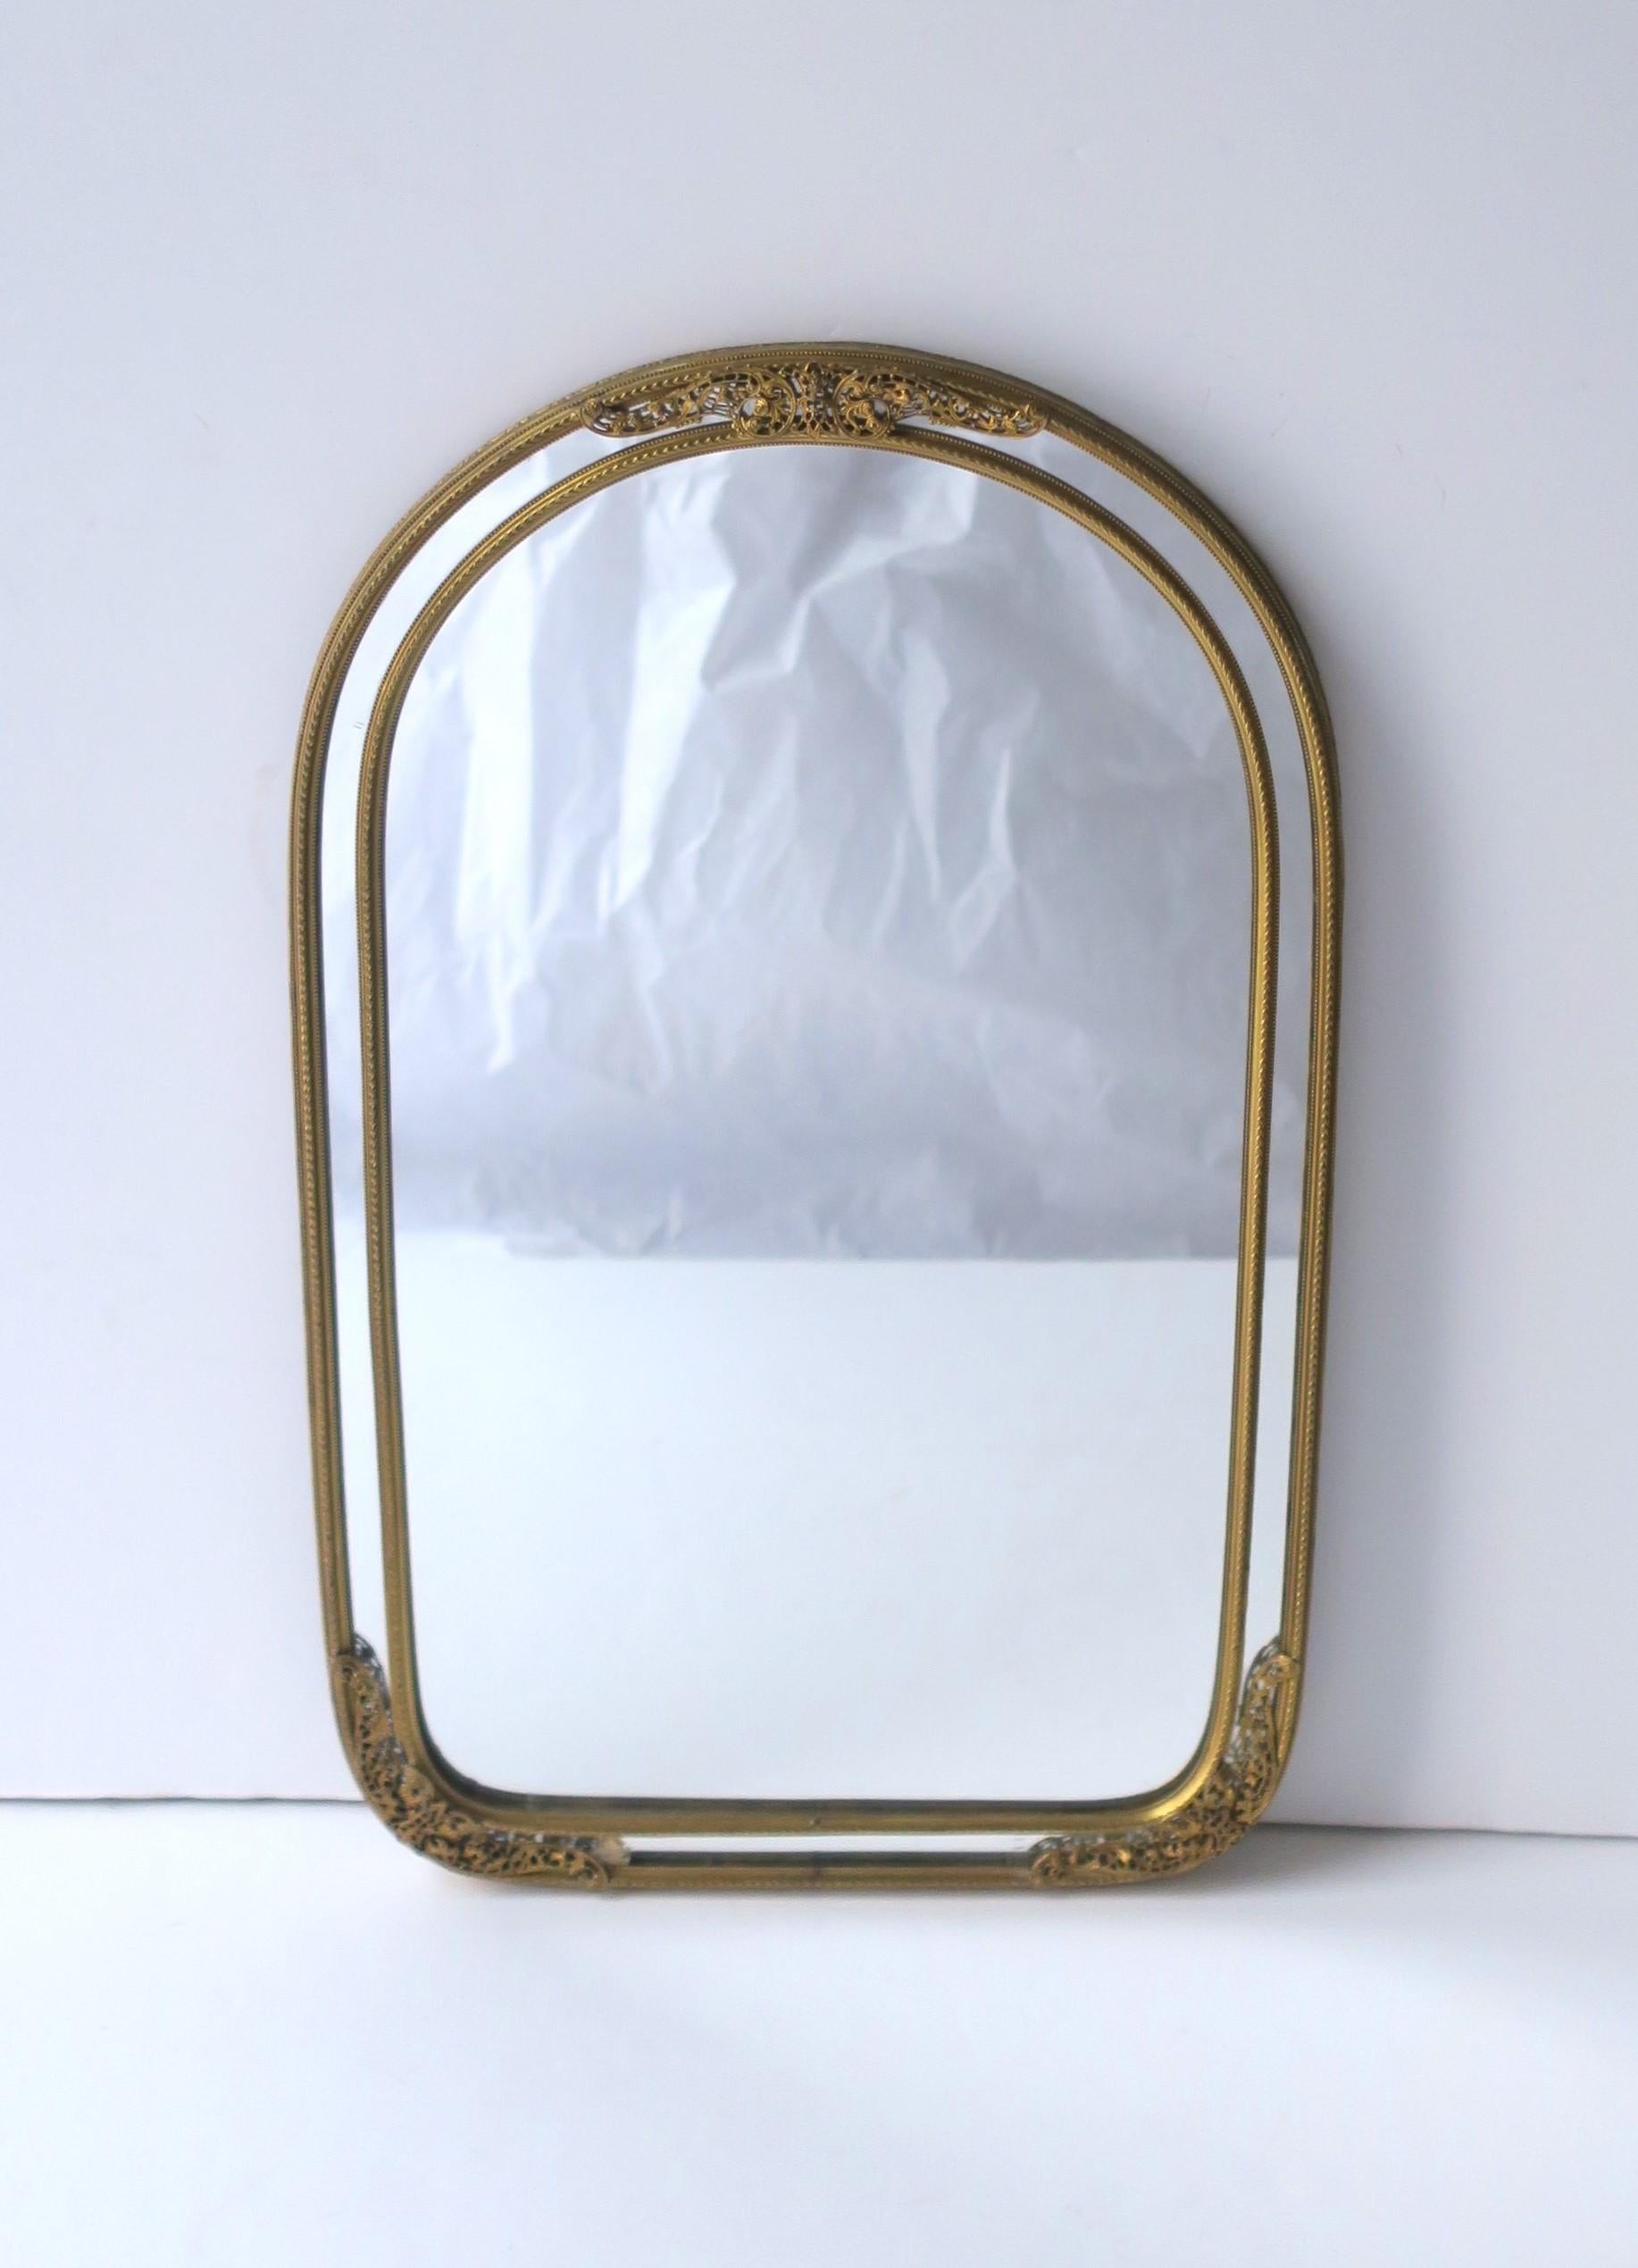 A beautiful and well-made European brass wall mirror, circa early to mid-20th century, Europe. Beautiful, small details are all around this quality brass frame. Mirror is on the smaller side of typical wall mirrors; piece would work well where a